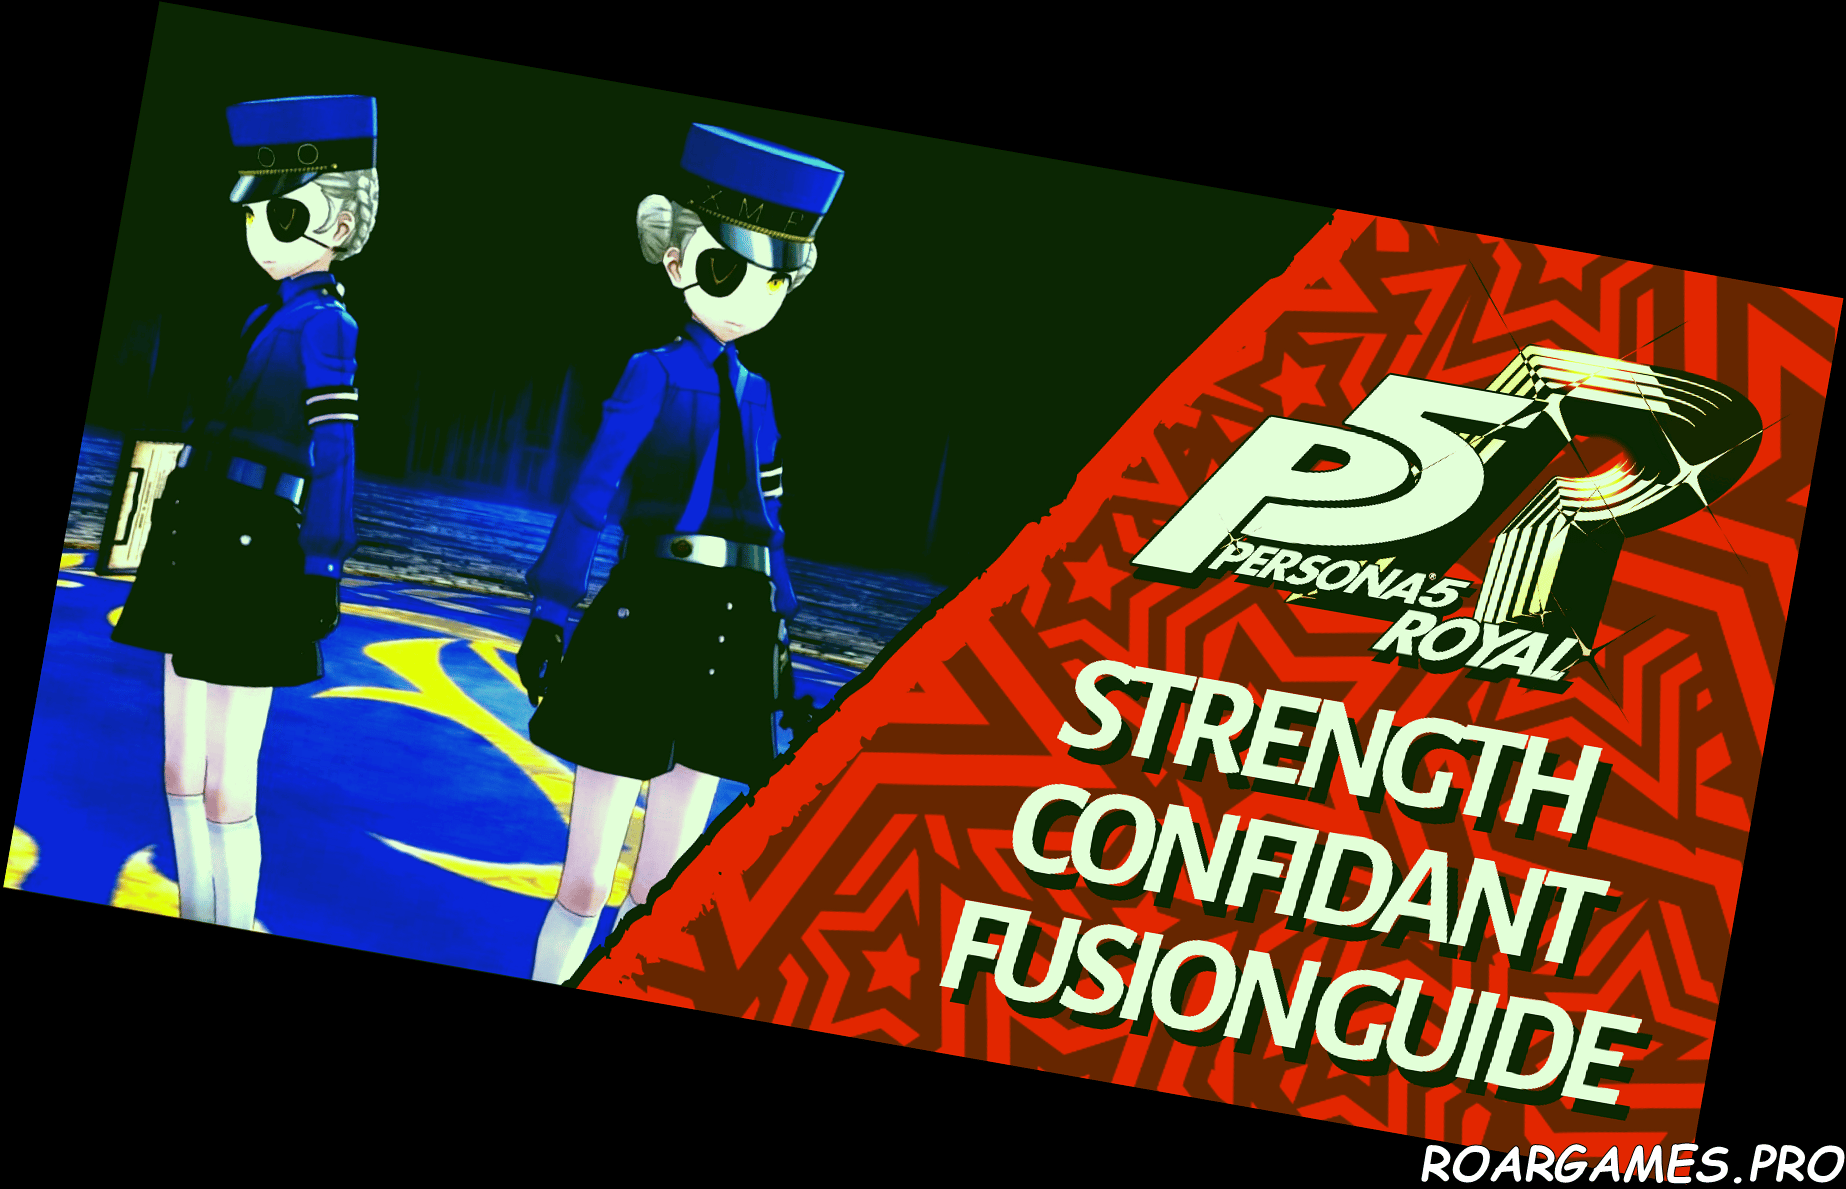 strength fusion guide cover2